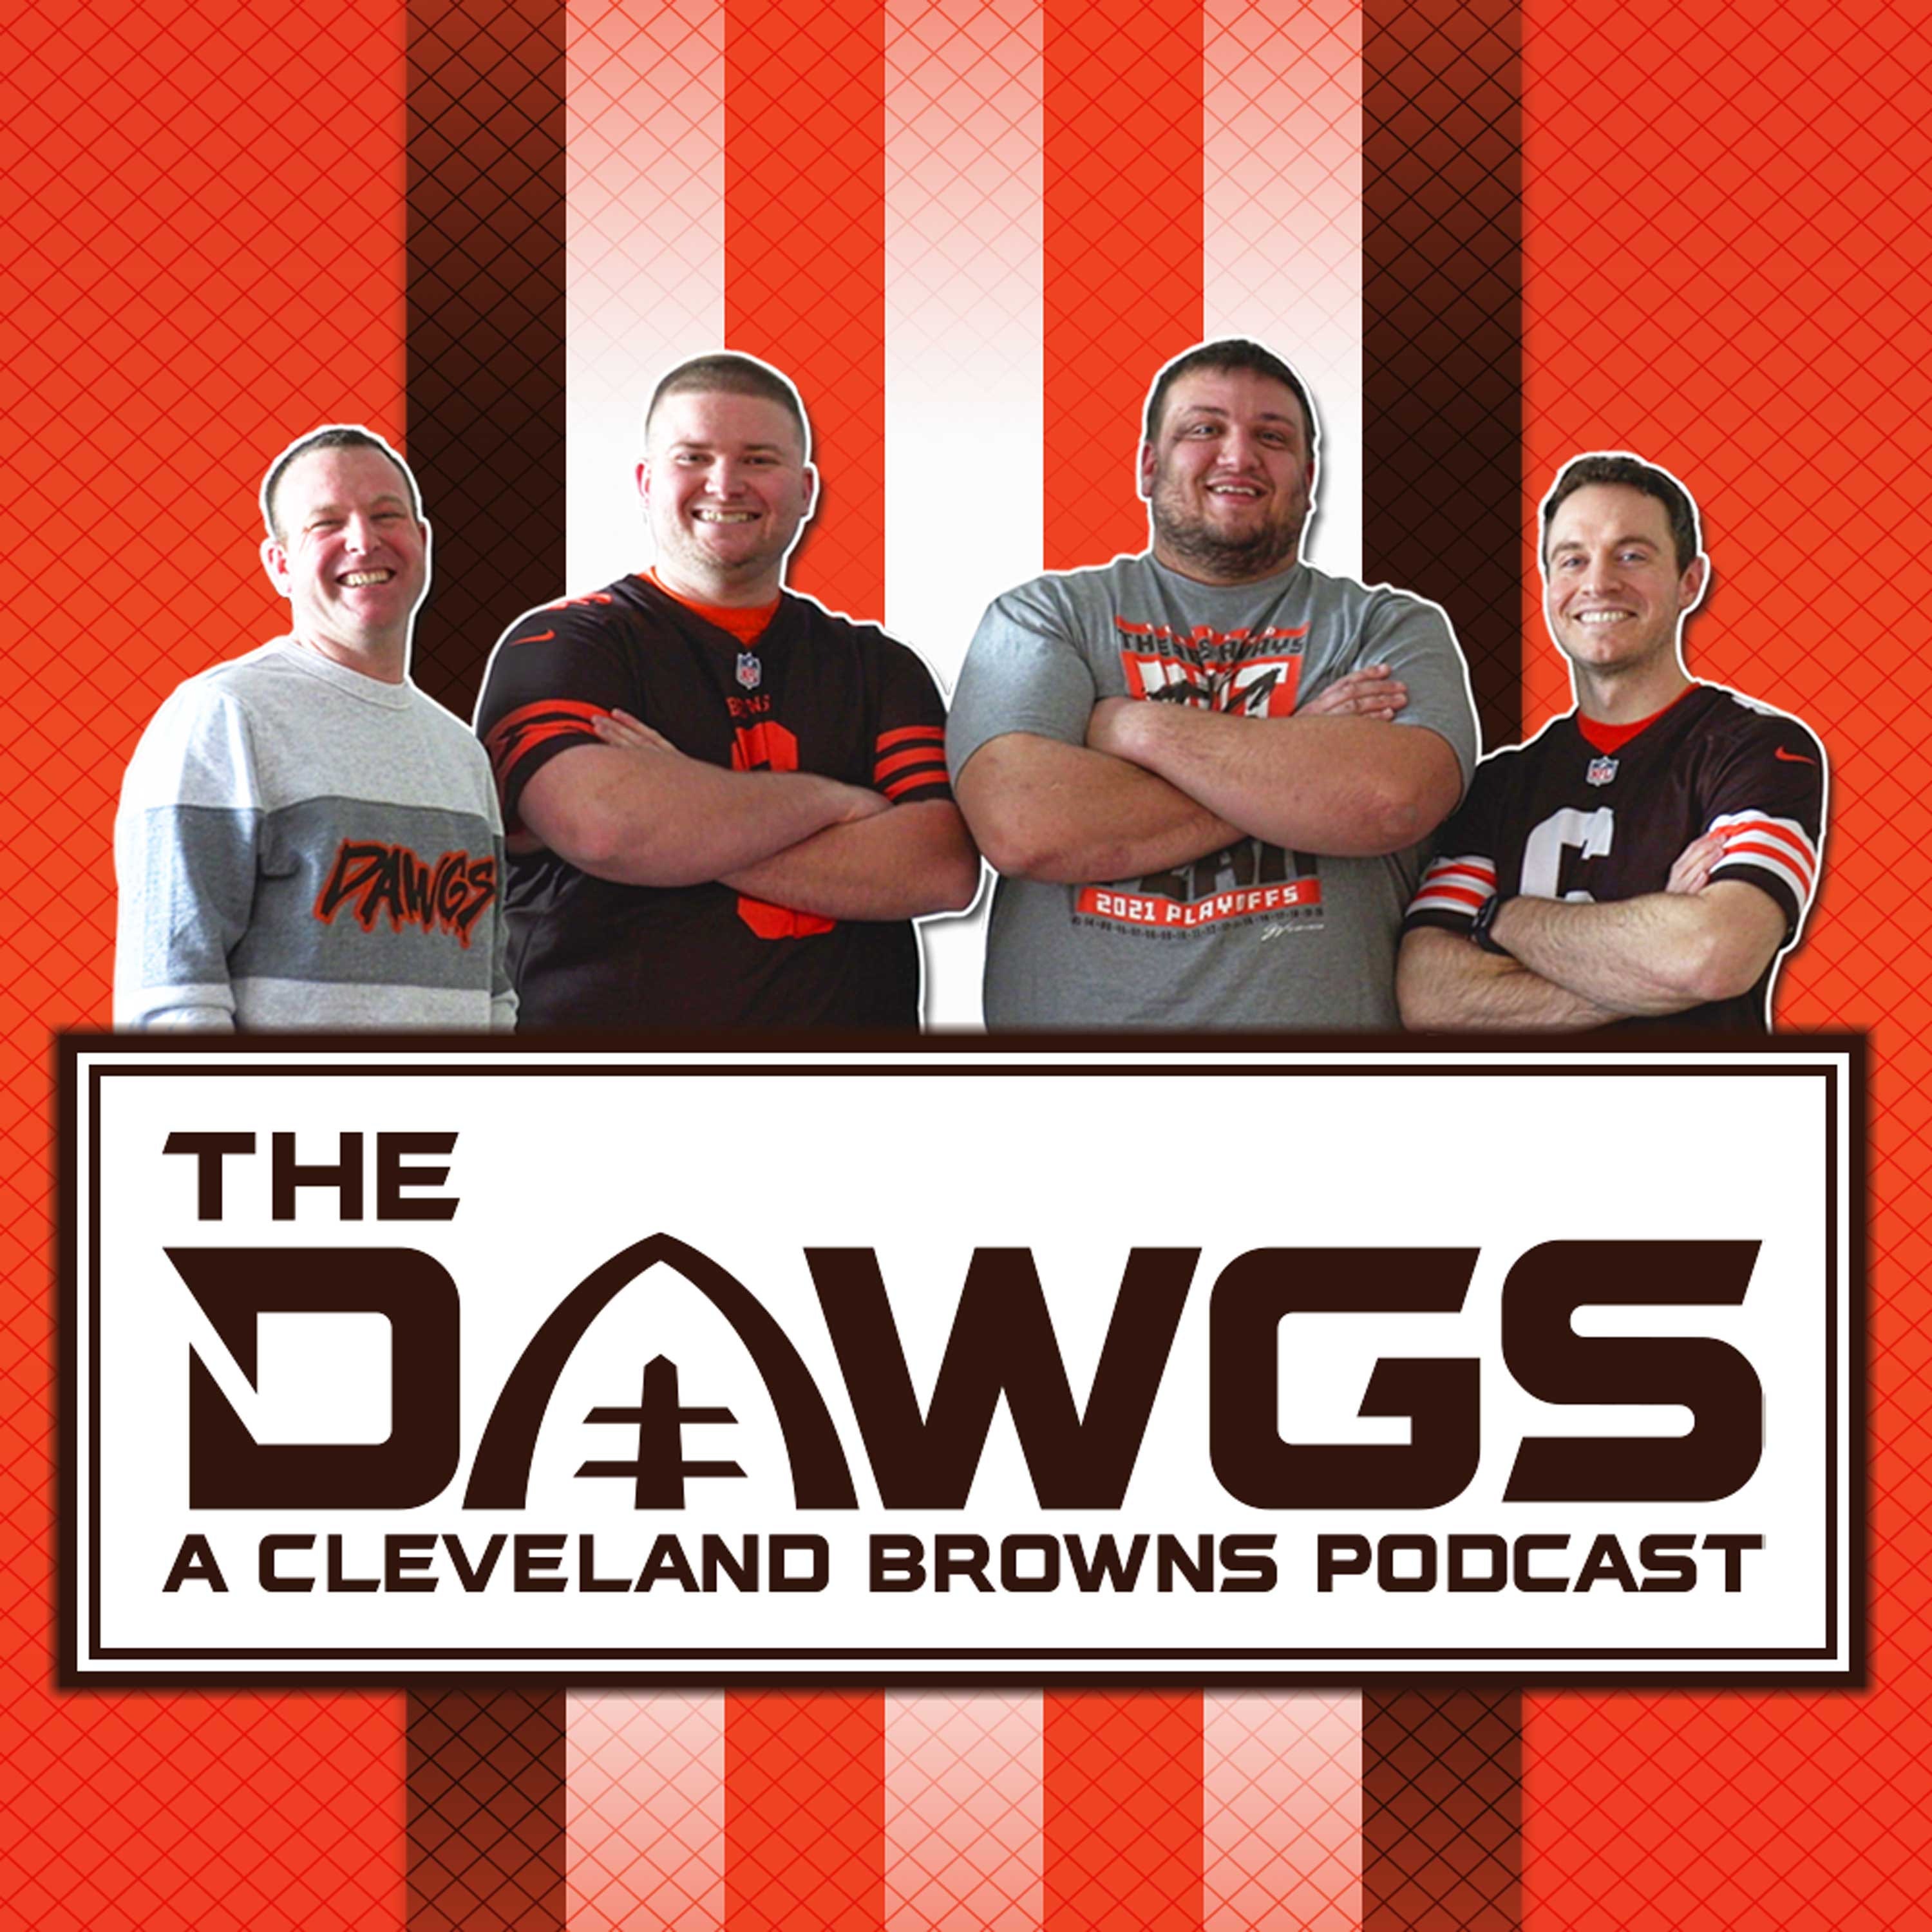 The Deshaun Watson Era Begins as the Baker Mayfield Era Ends | The Dawgs - A Cleveland Browns Podcast - March 22, 2022